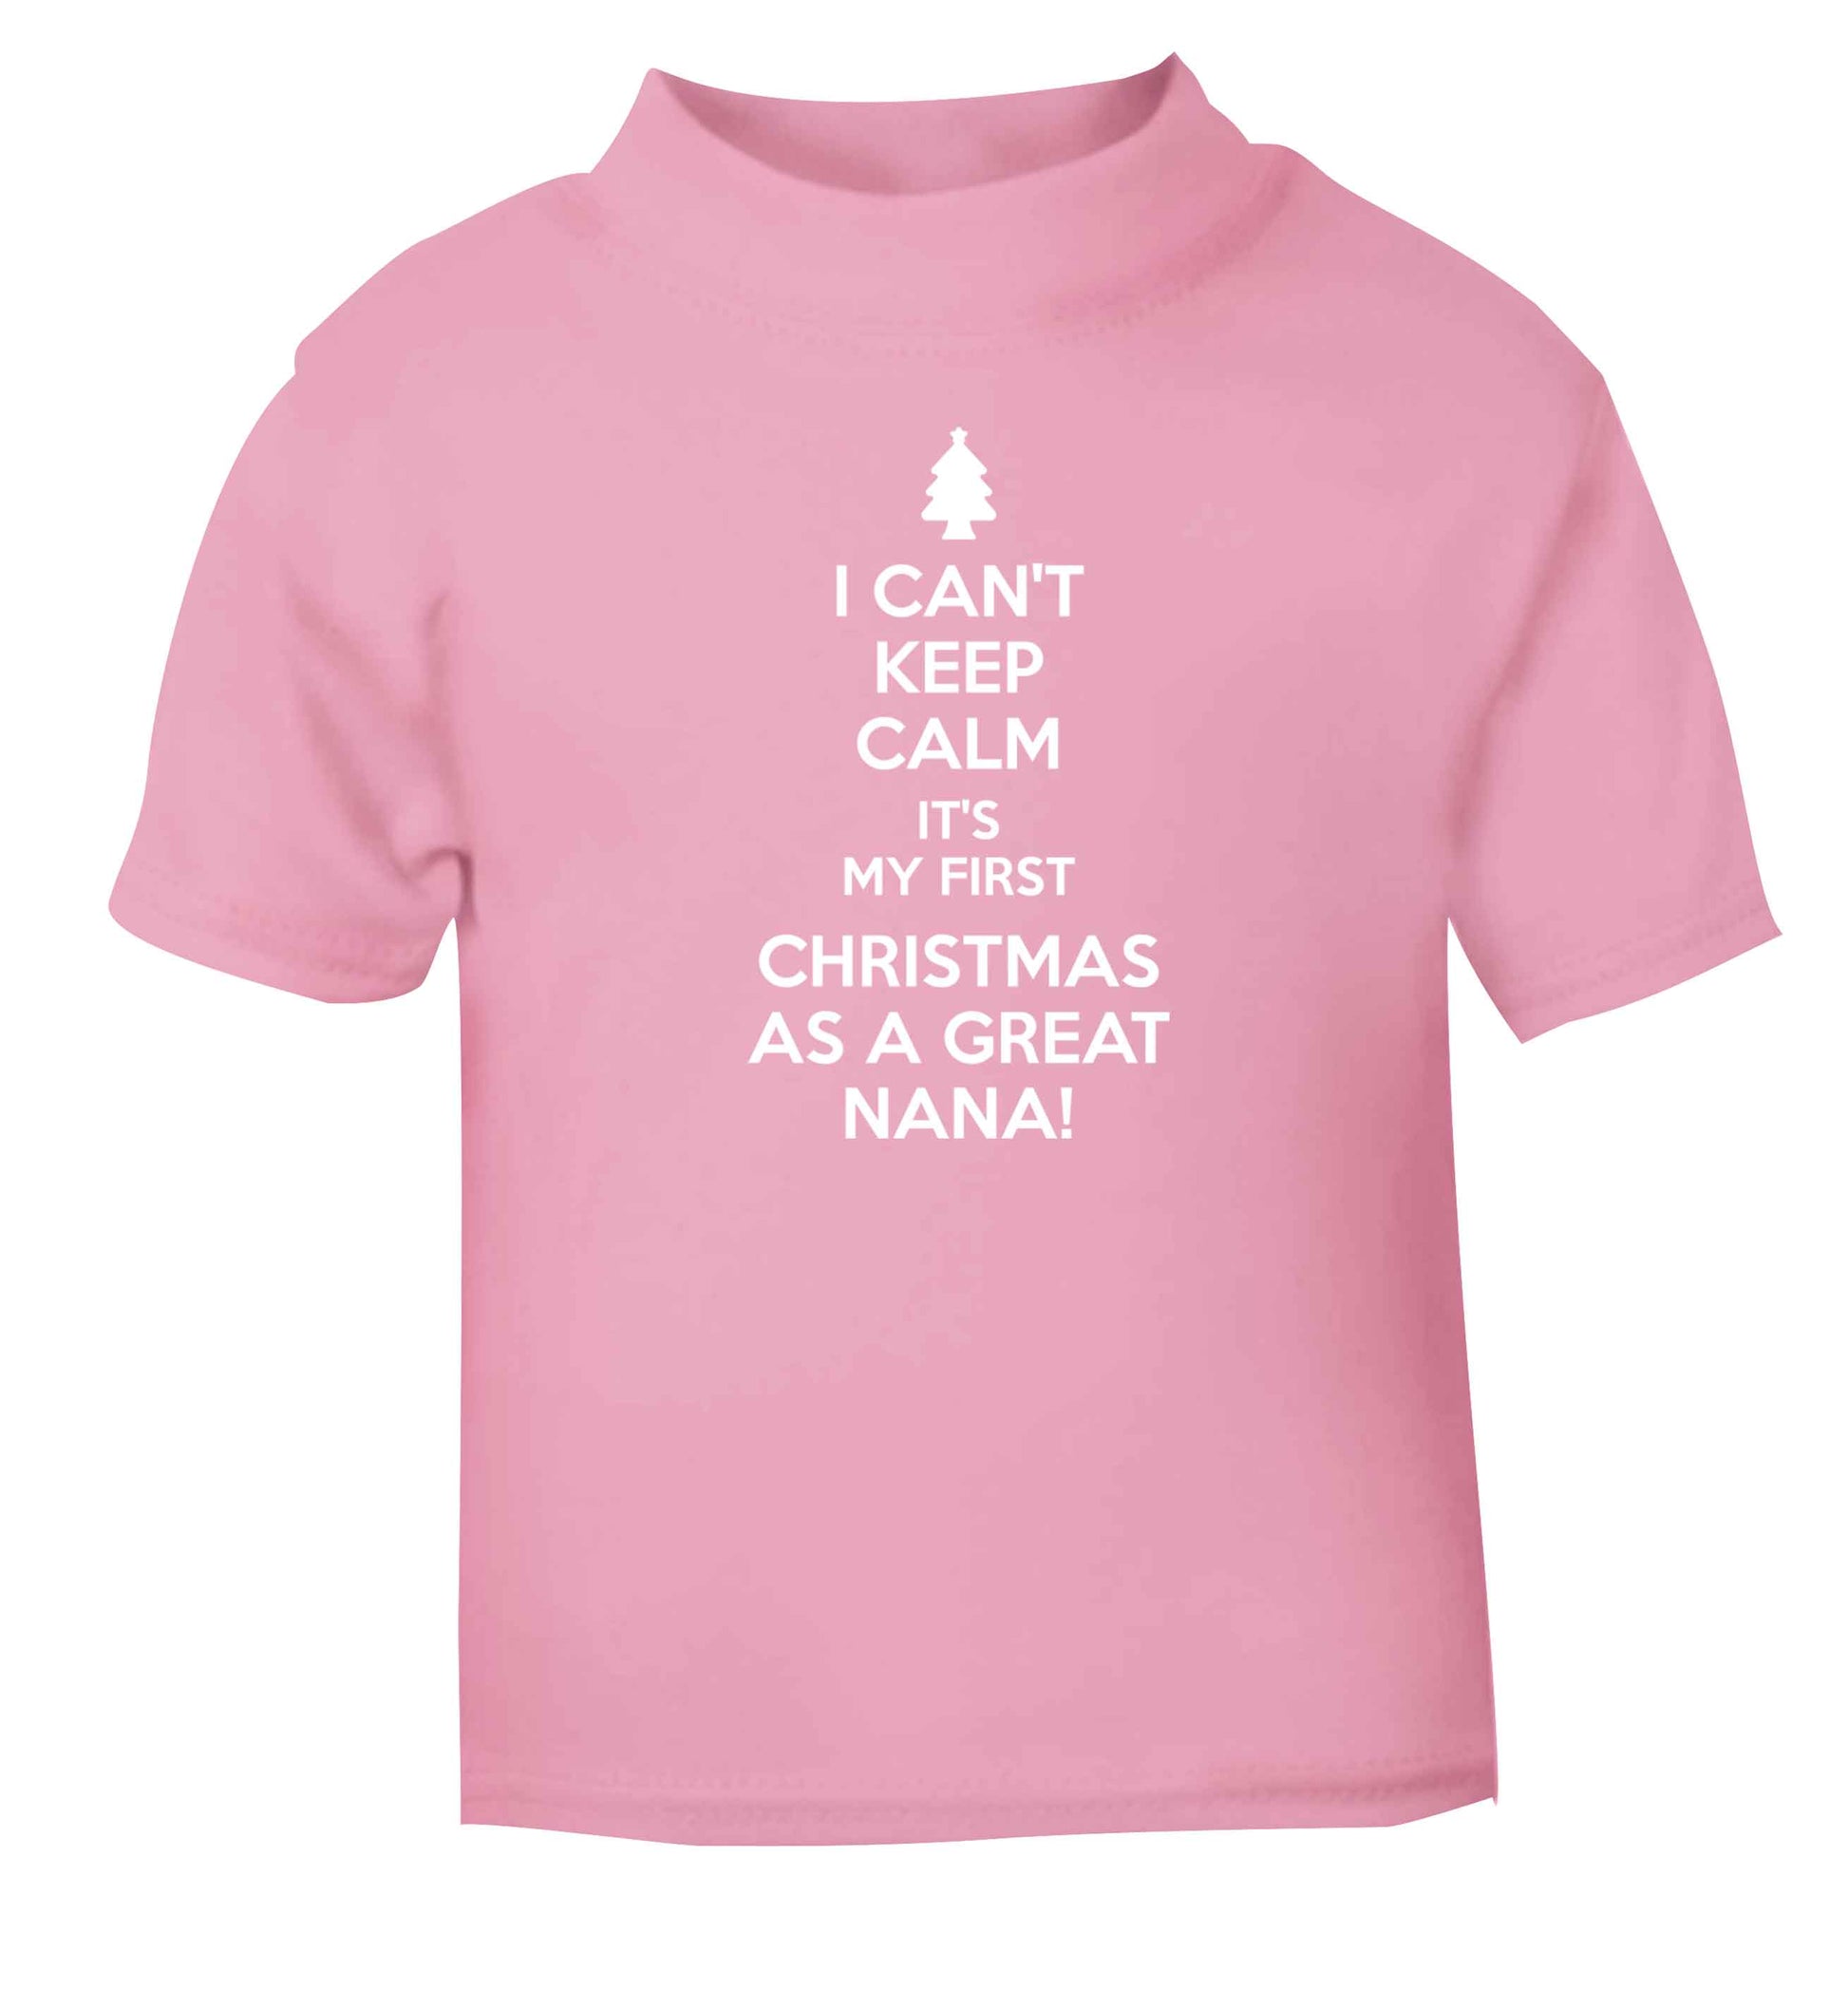 I can't keep calm it's my first Christmas as a great nana! light pink Baby Toddler Tshirt 2 Years